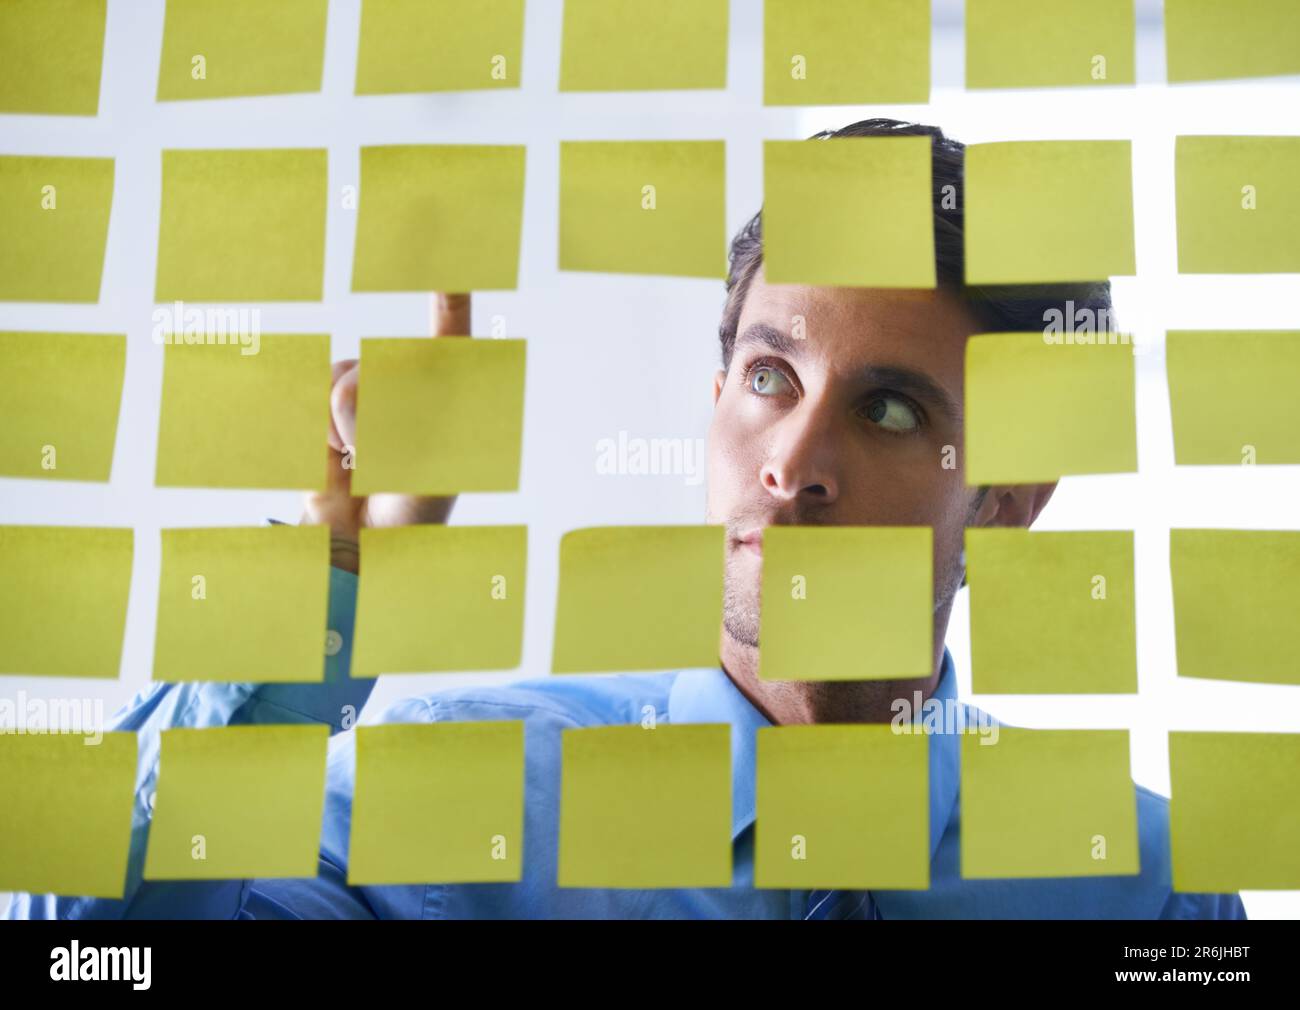 Creative man, face and thinking, pointing to sticky note in schedule brainstorming or planning tasks on glass board. Thoughtful male contemplating Stock Photo